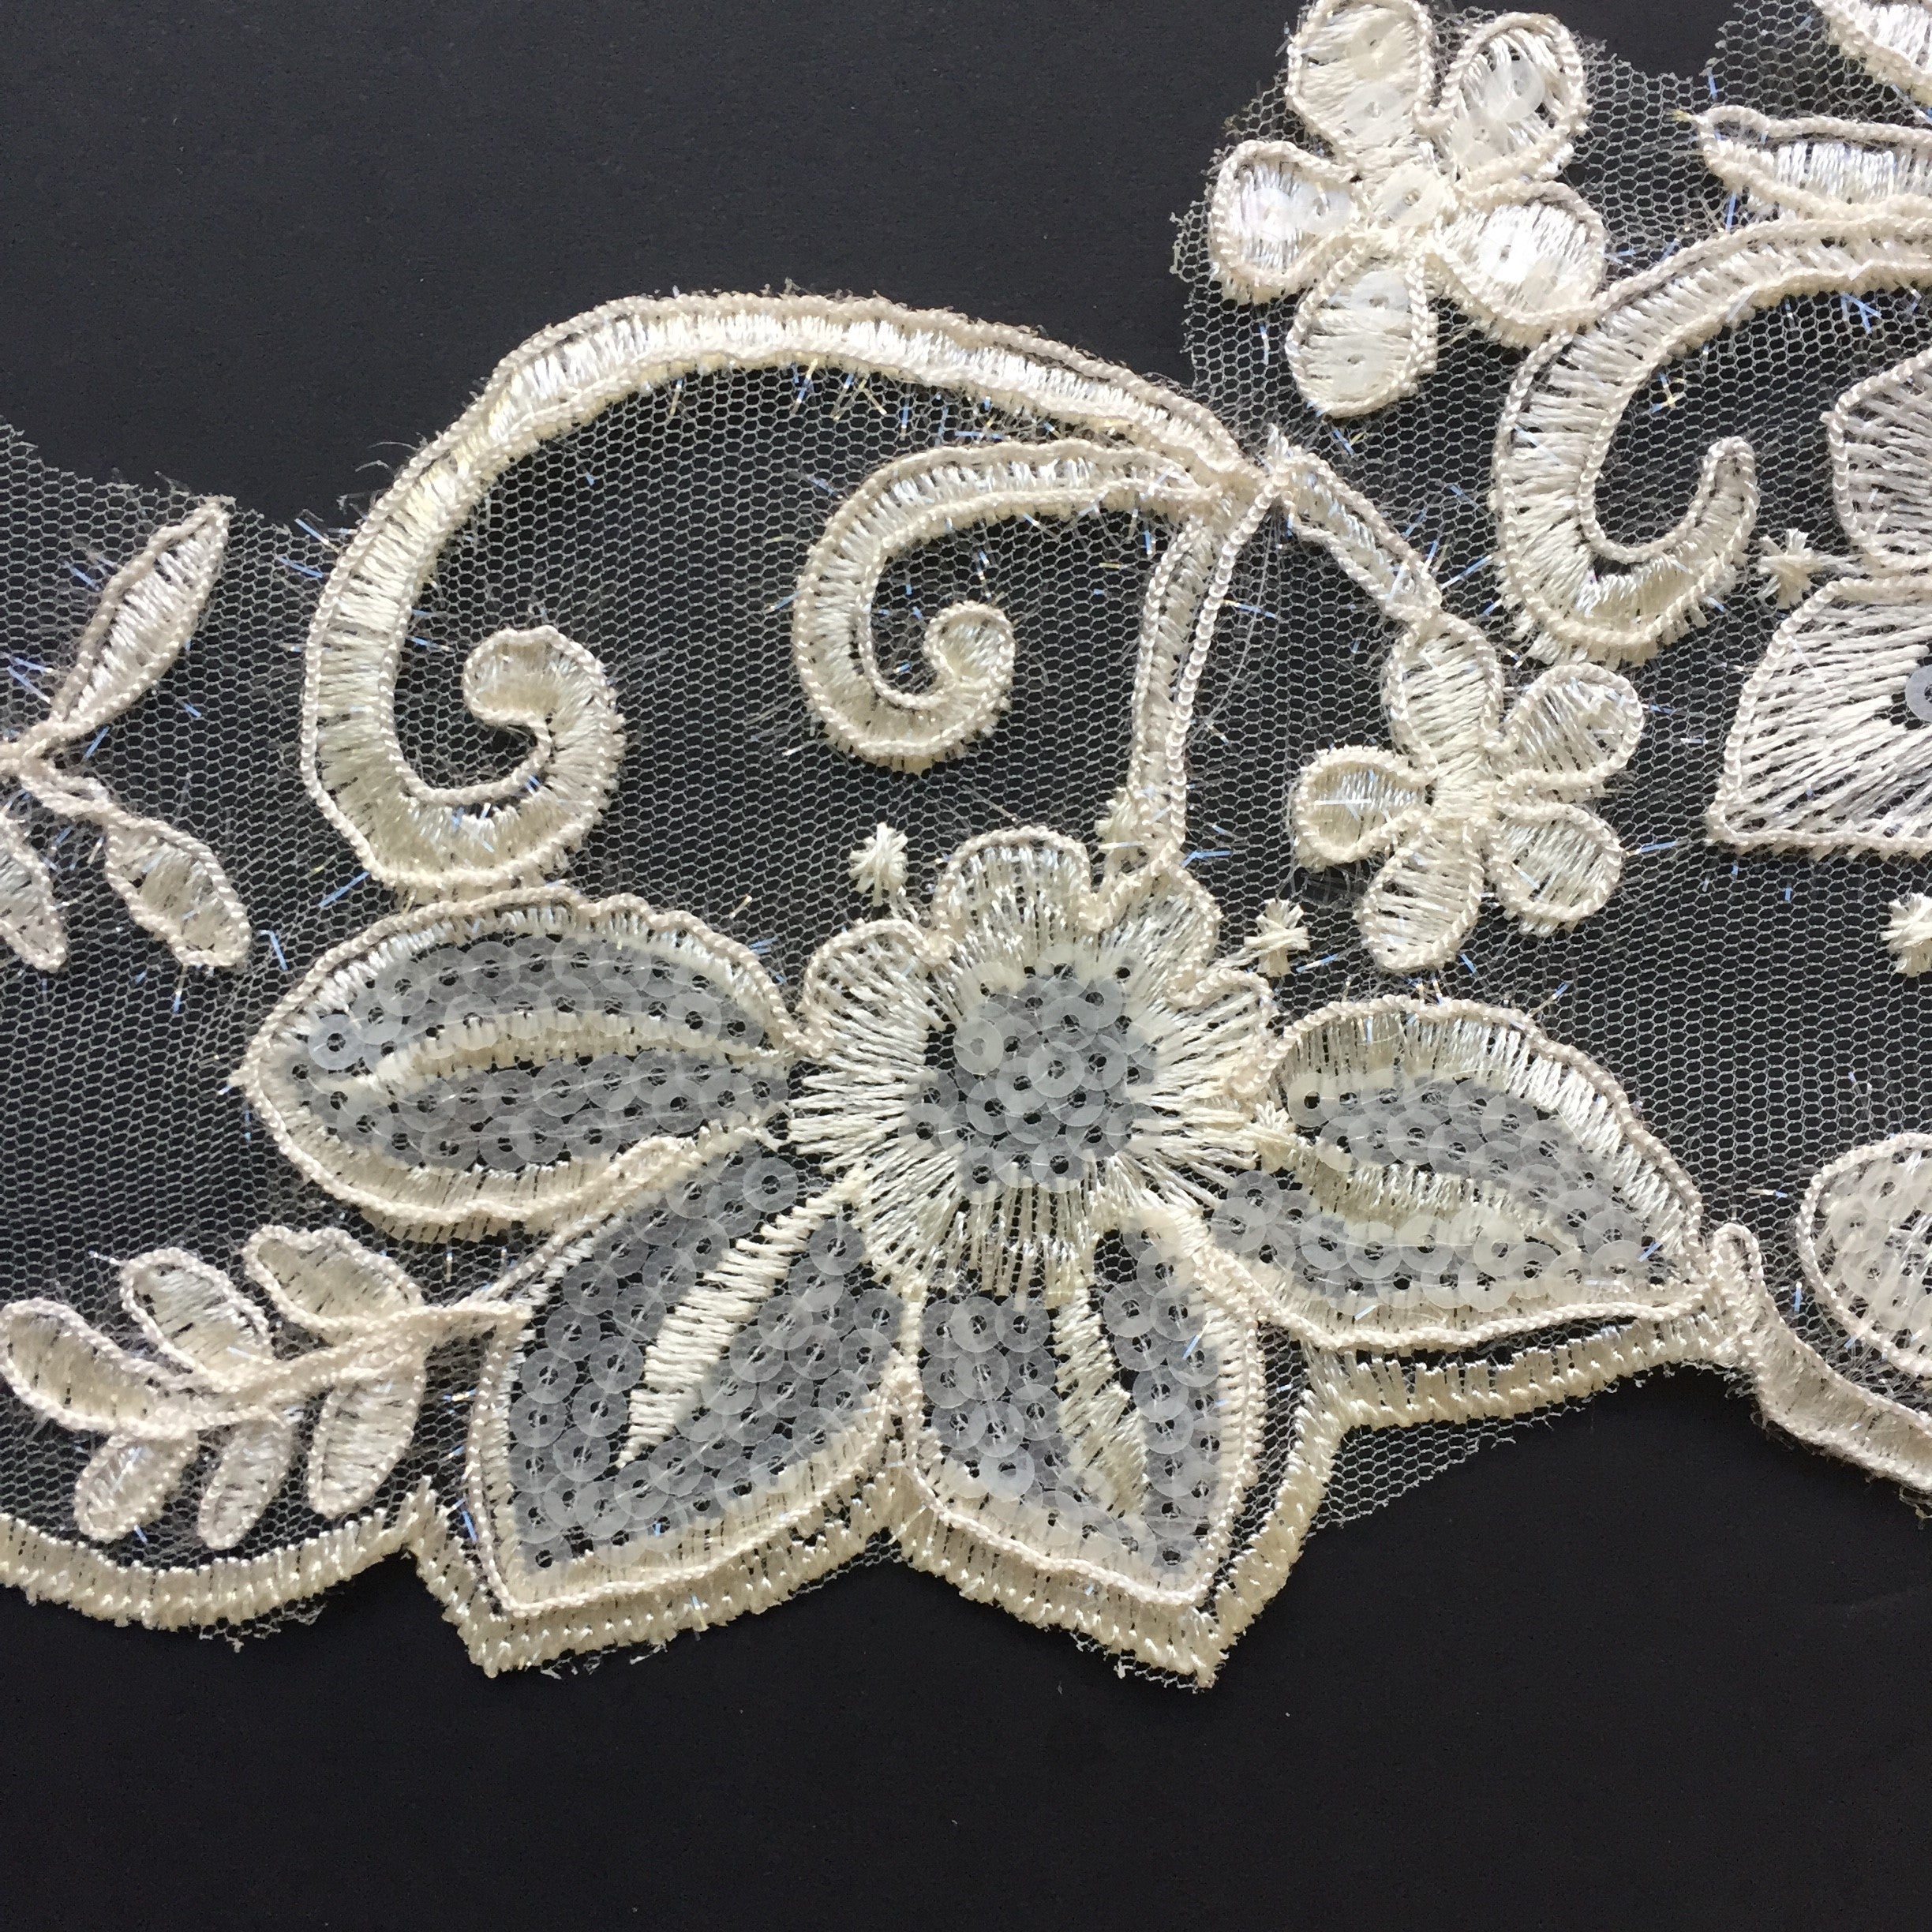 The embroidered lower edge follows the outline of the motifs making an interesting feature for the bottom of a tutu plate, costume or bridal veil.